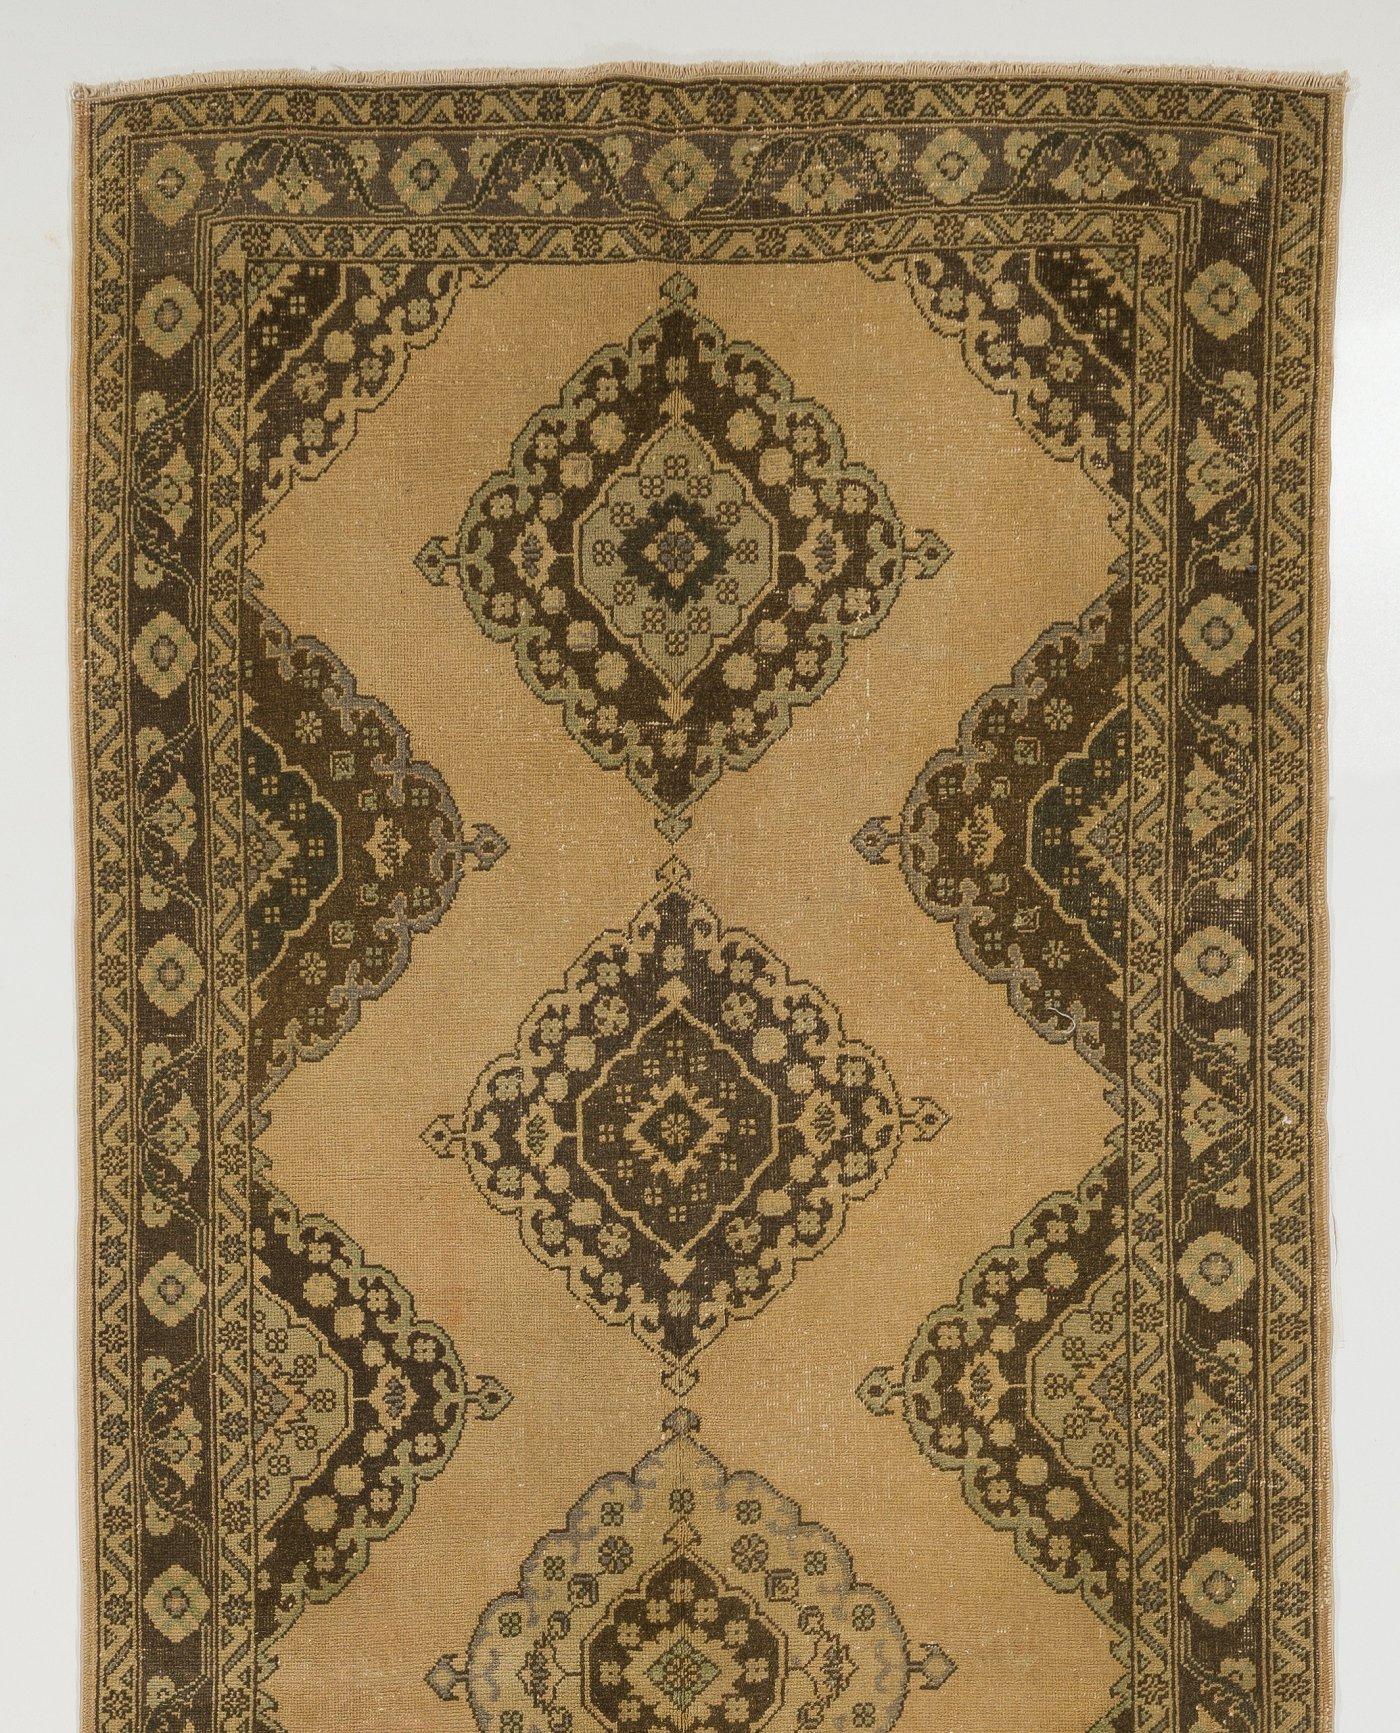 A vintage Turkish runner rug in neutral colors. It was hand-knotted in the 1950s with low wool on cotton foundation and features a multiple medallion design. It is in very good condition, professionally-washed, sturdy and suitable for areas with